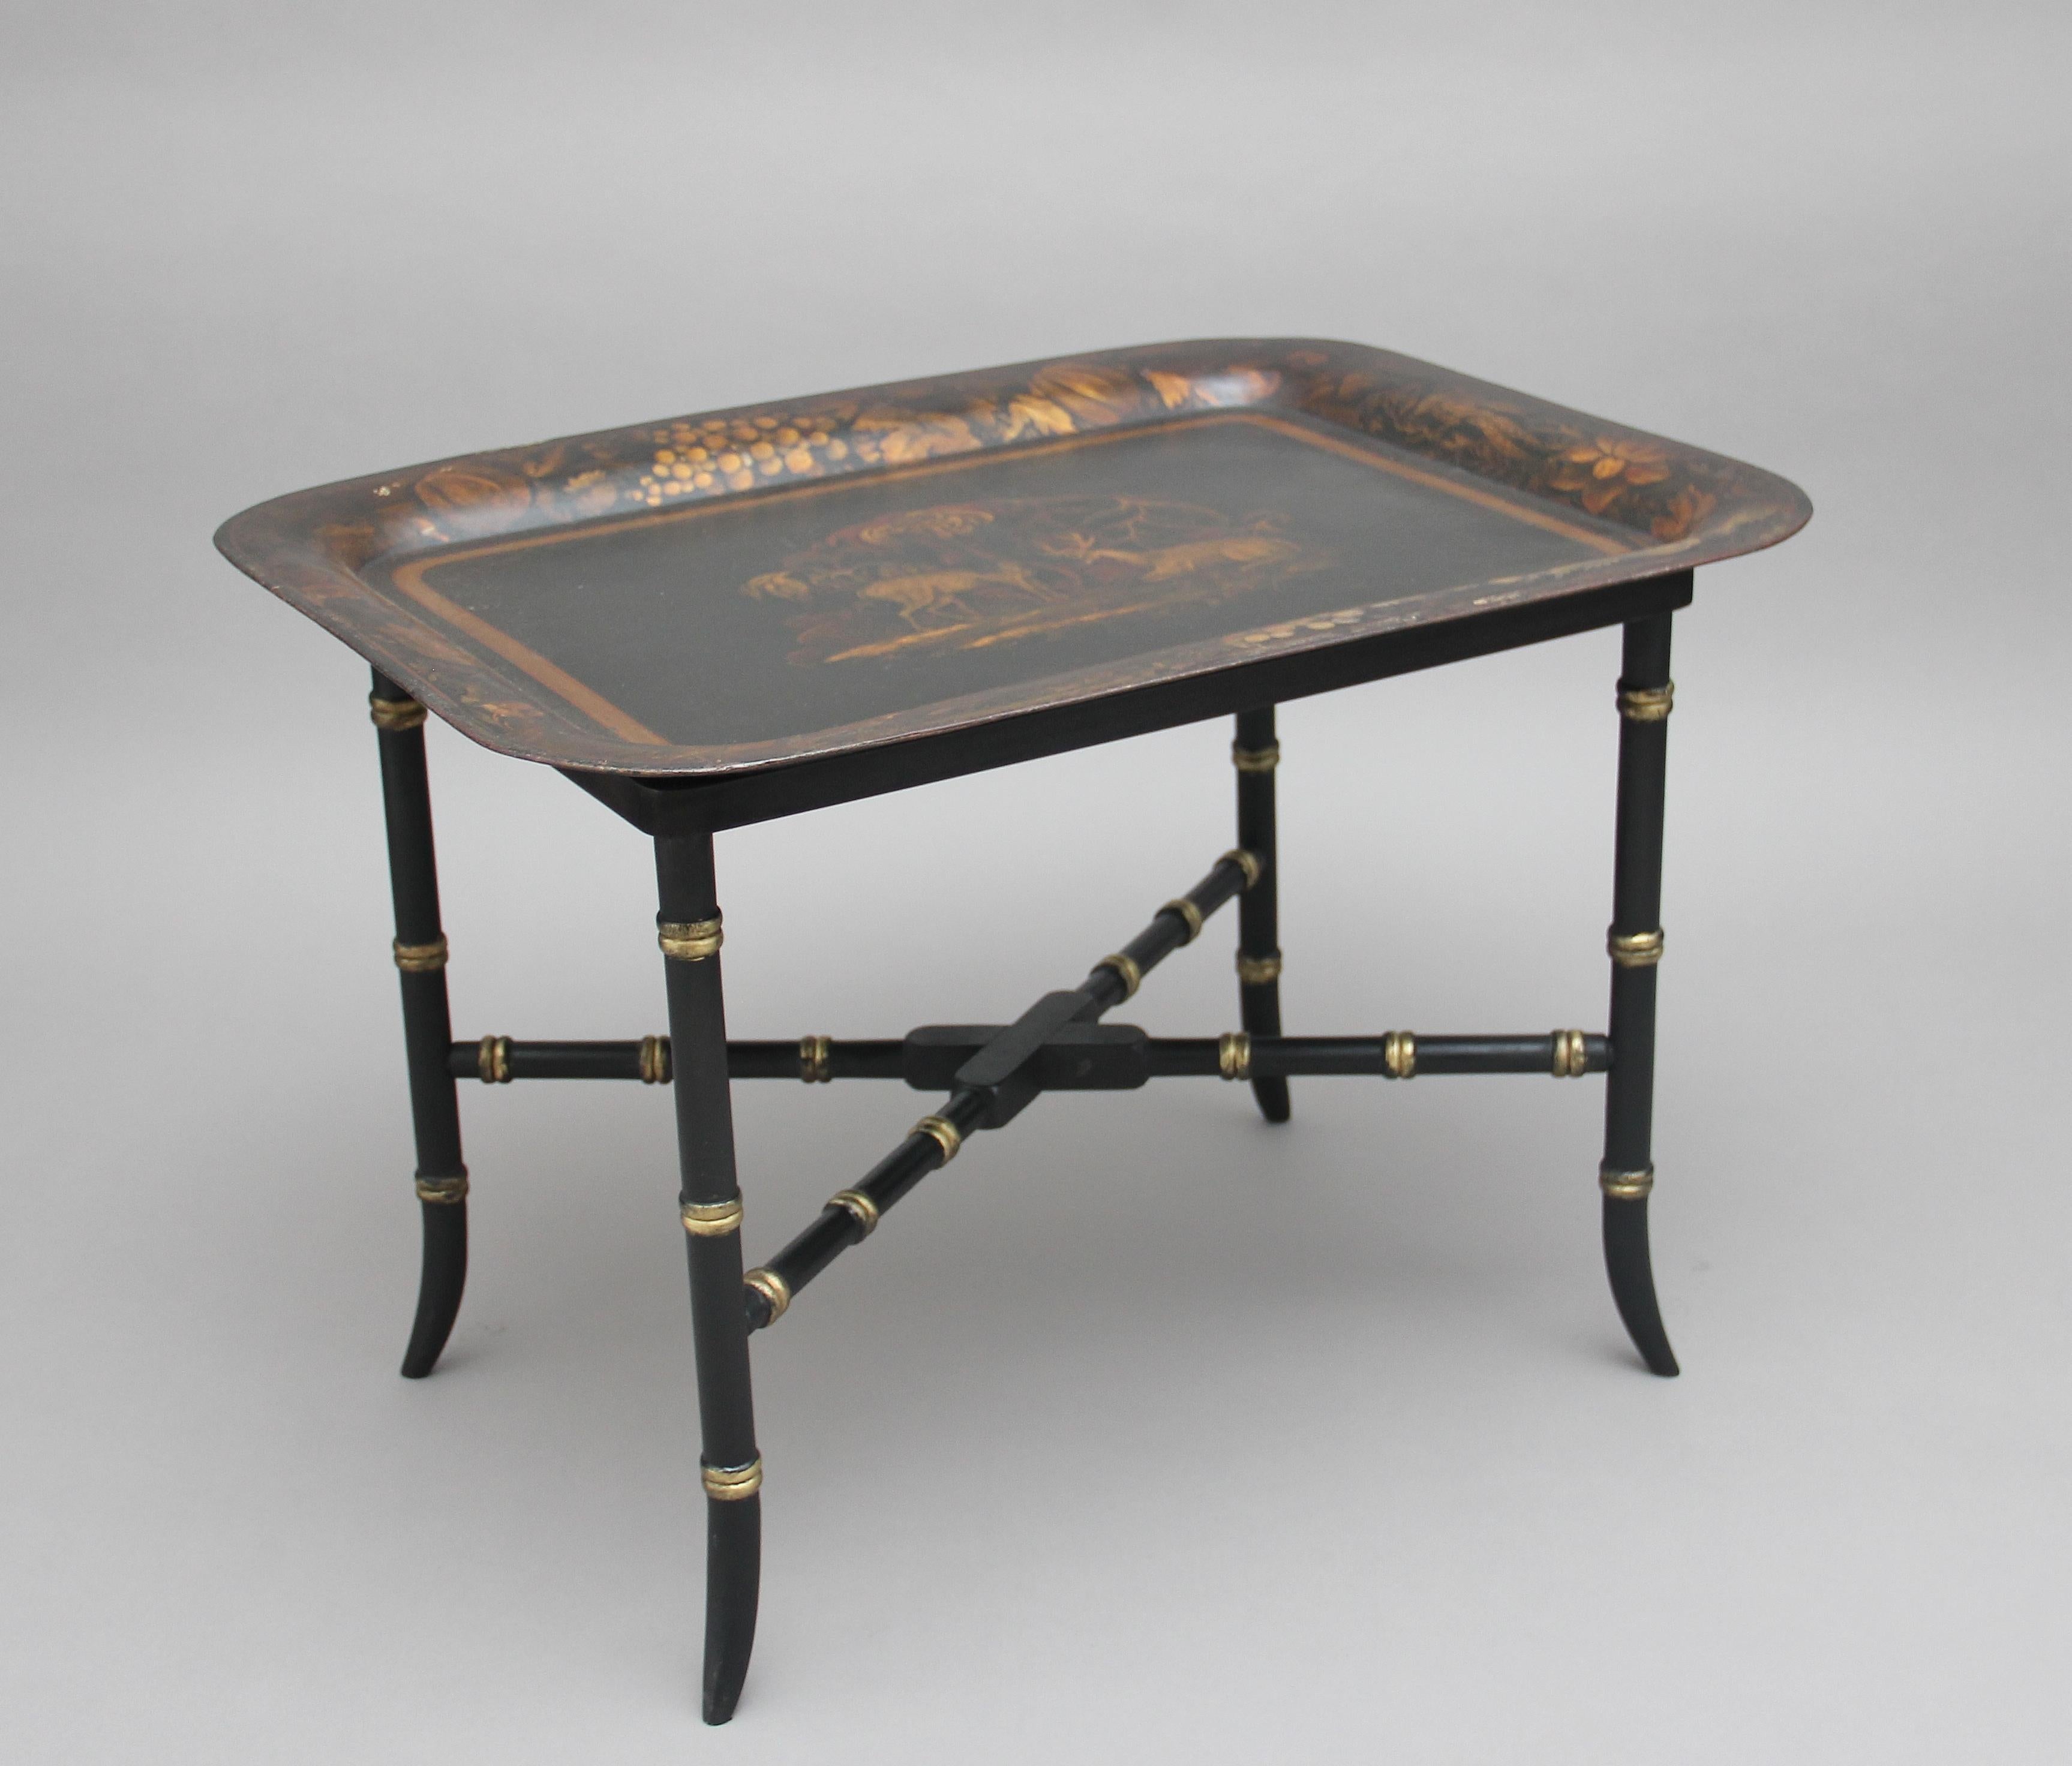 British Early 19th Century Toleware Tray on Stand